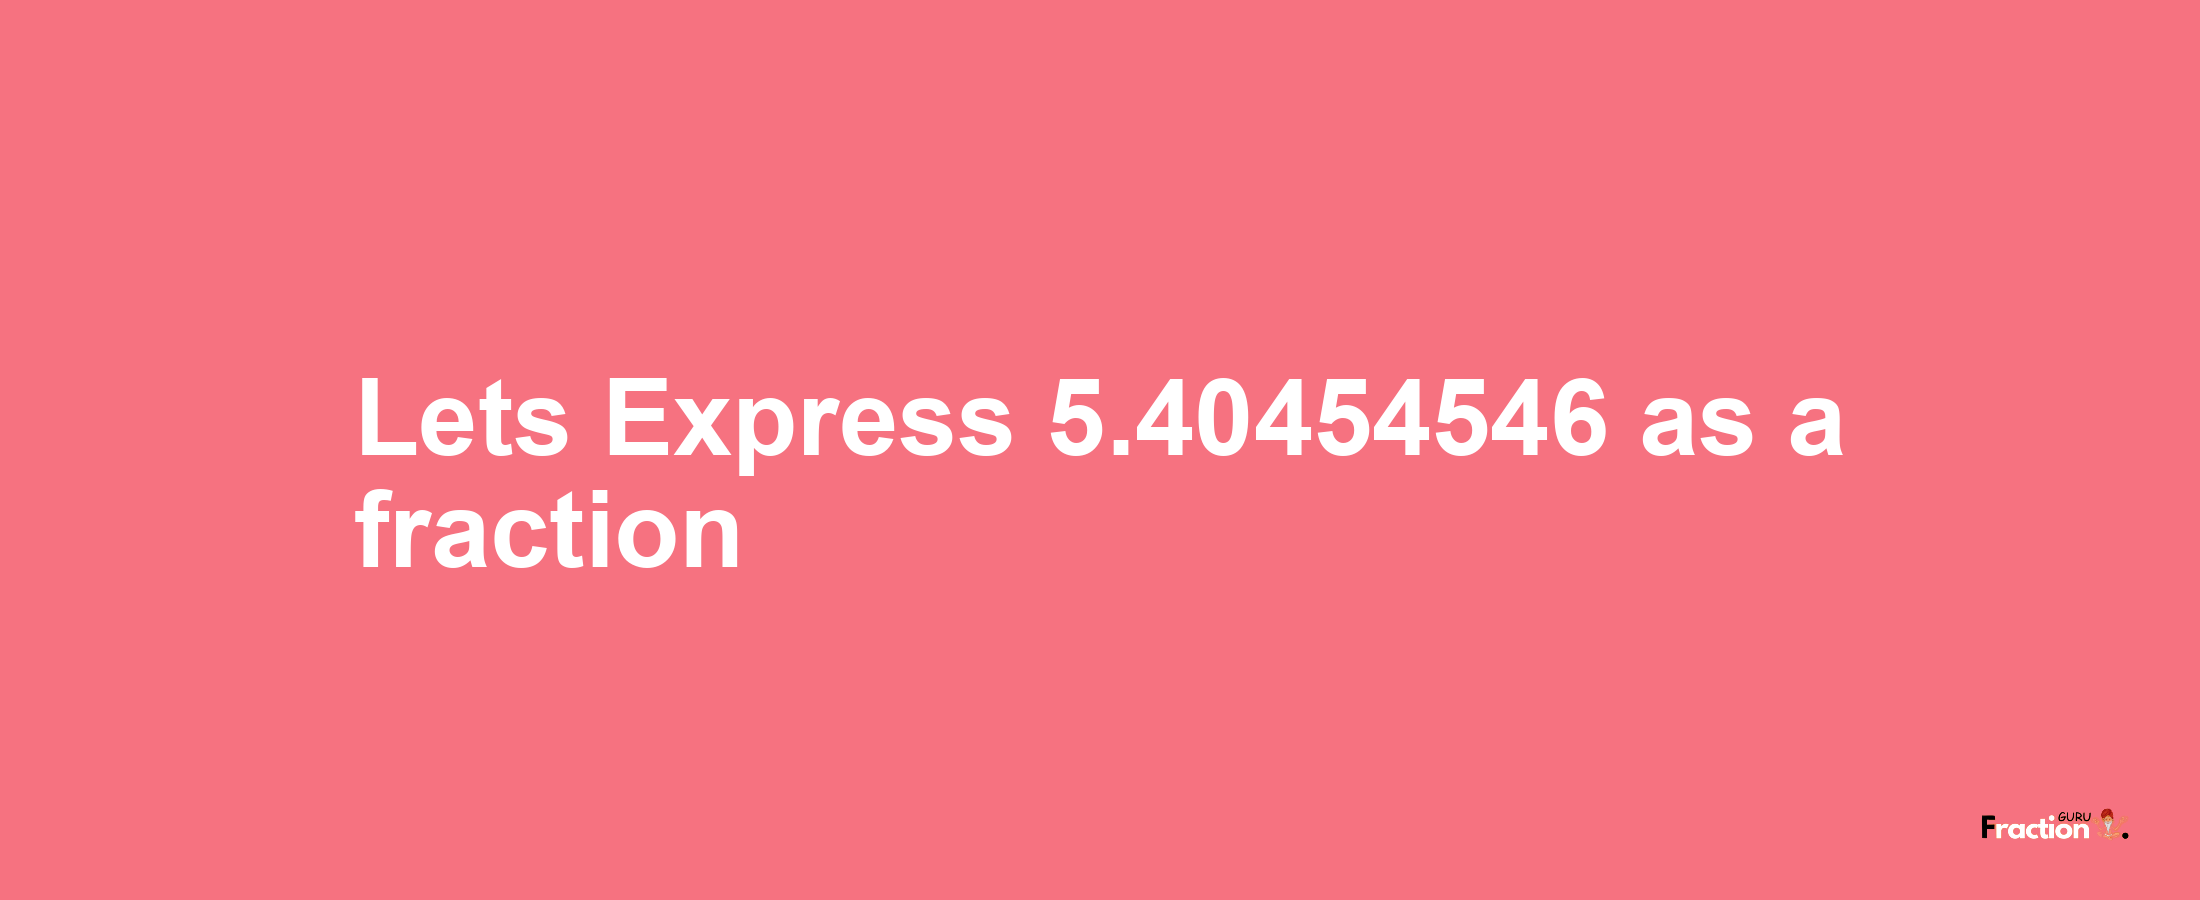 Lets Express 5.40454546 as afraction